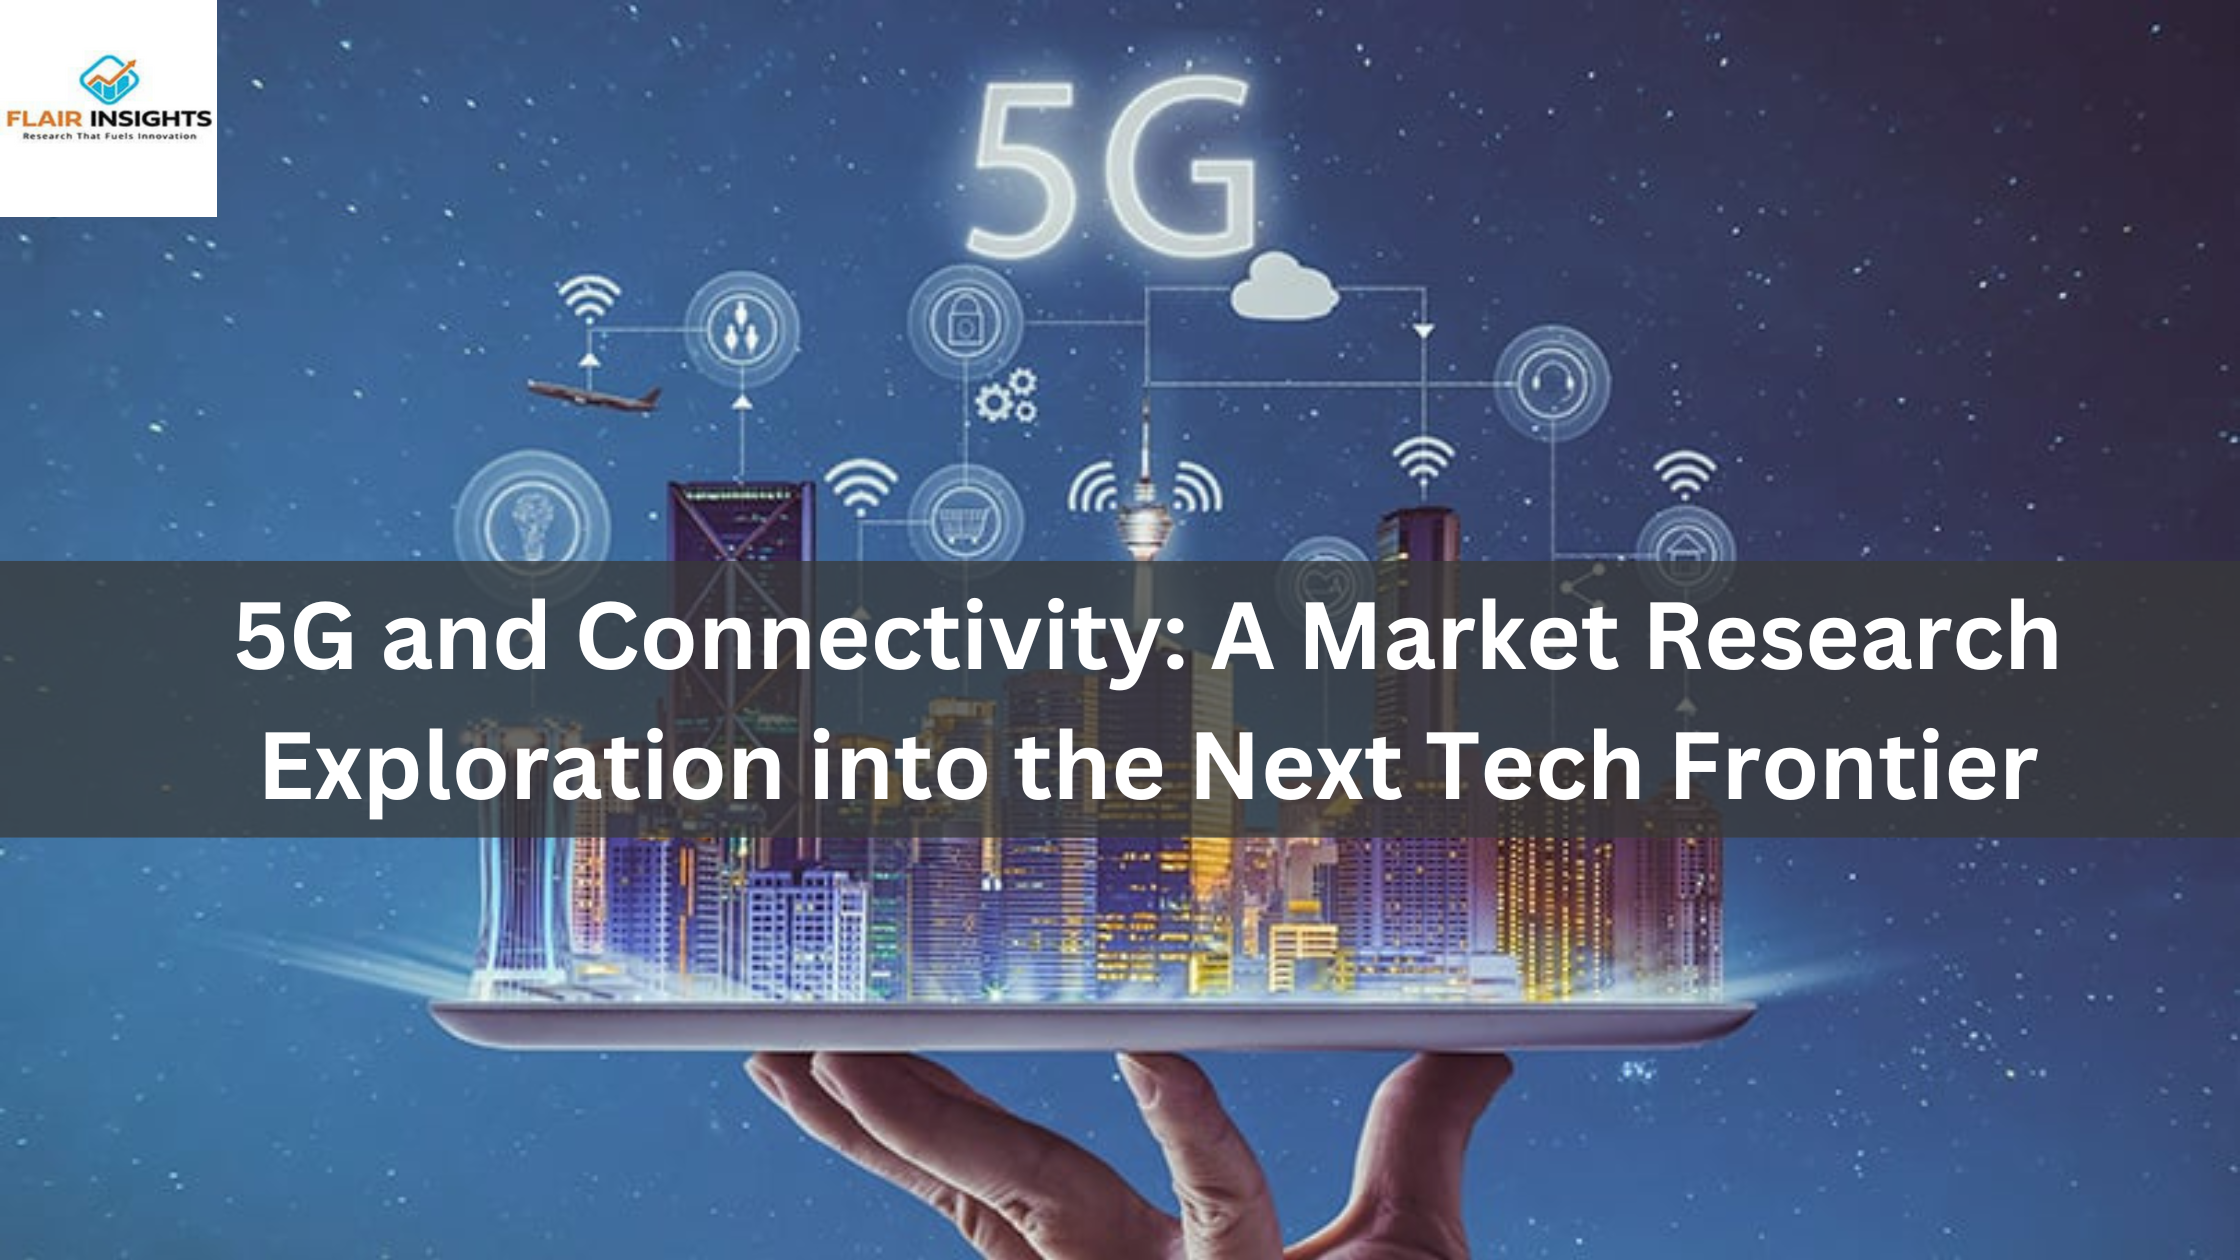 5G and Connectivity: A Market Research Exploration into the Next Tech Frontier